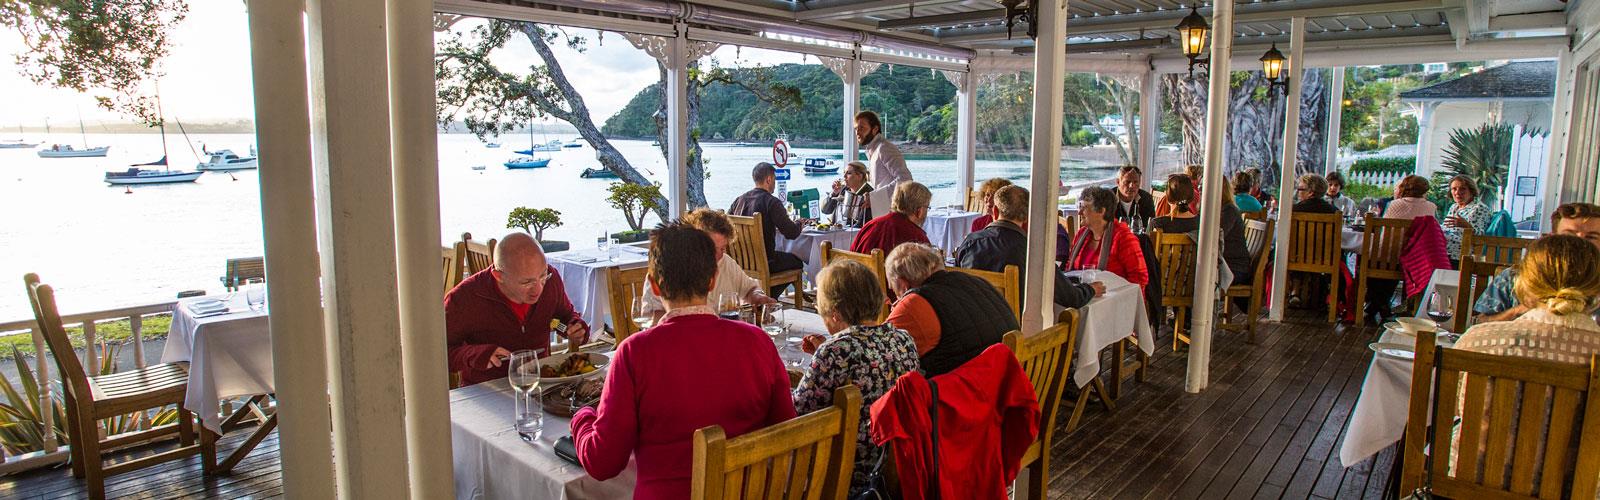 Bay of Islands Dining | Area Restaurants and Cafes